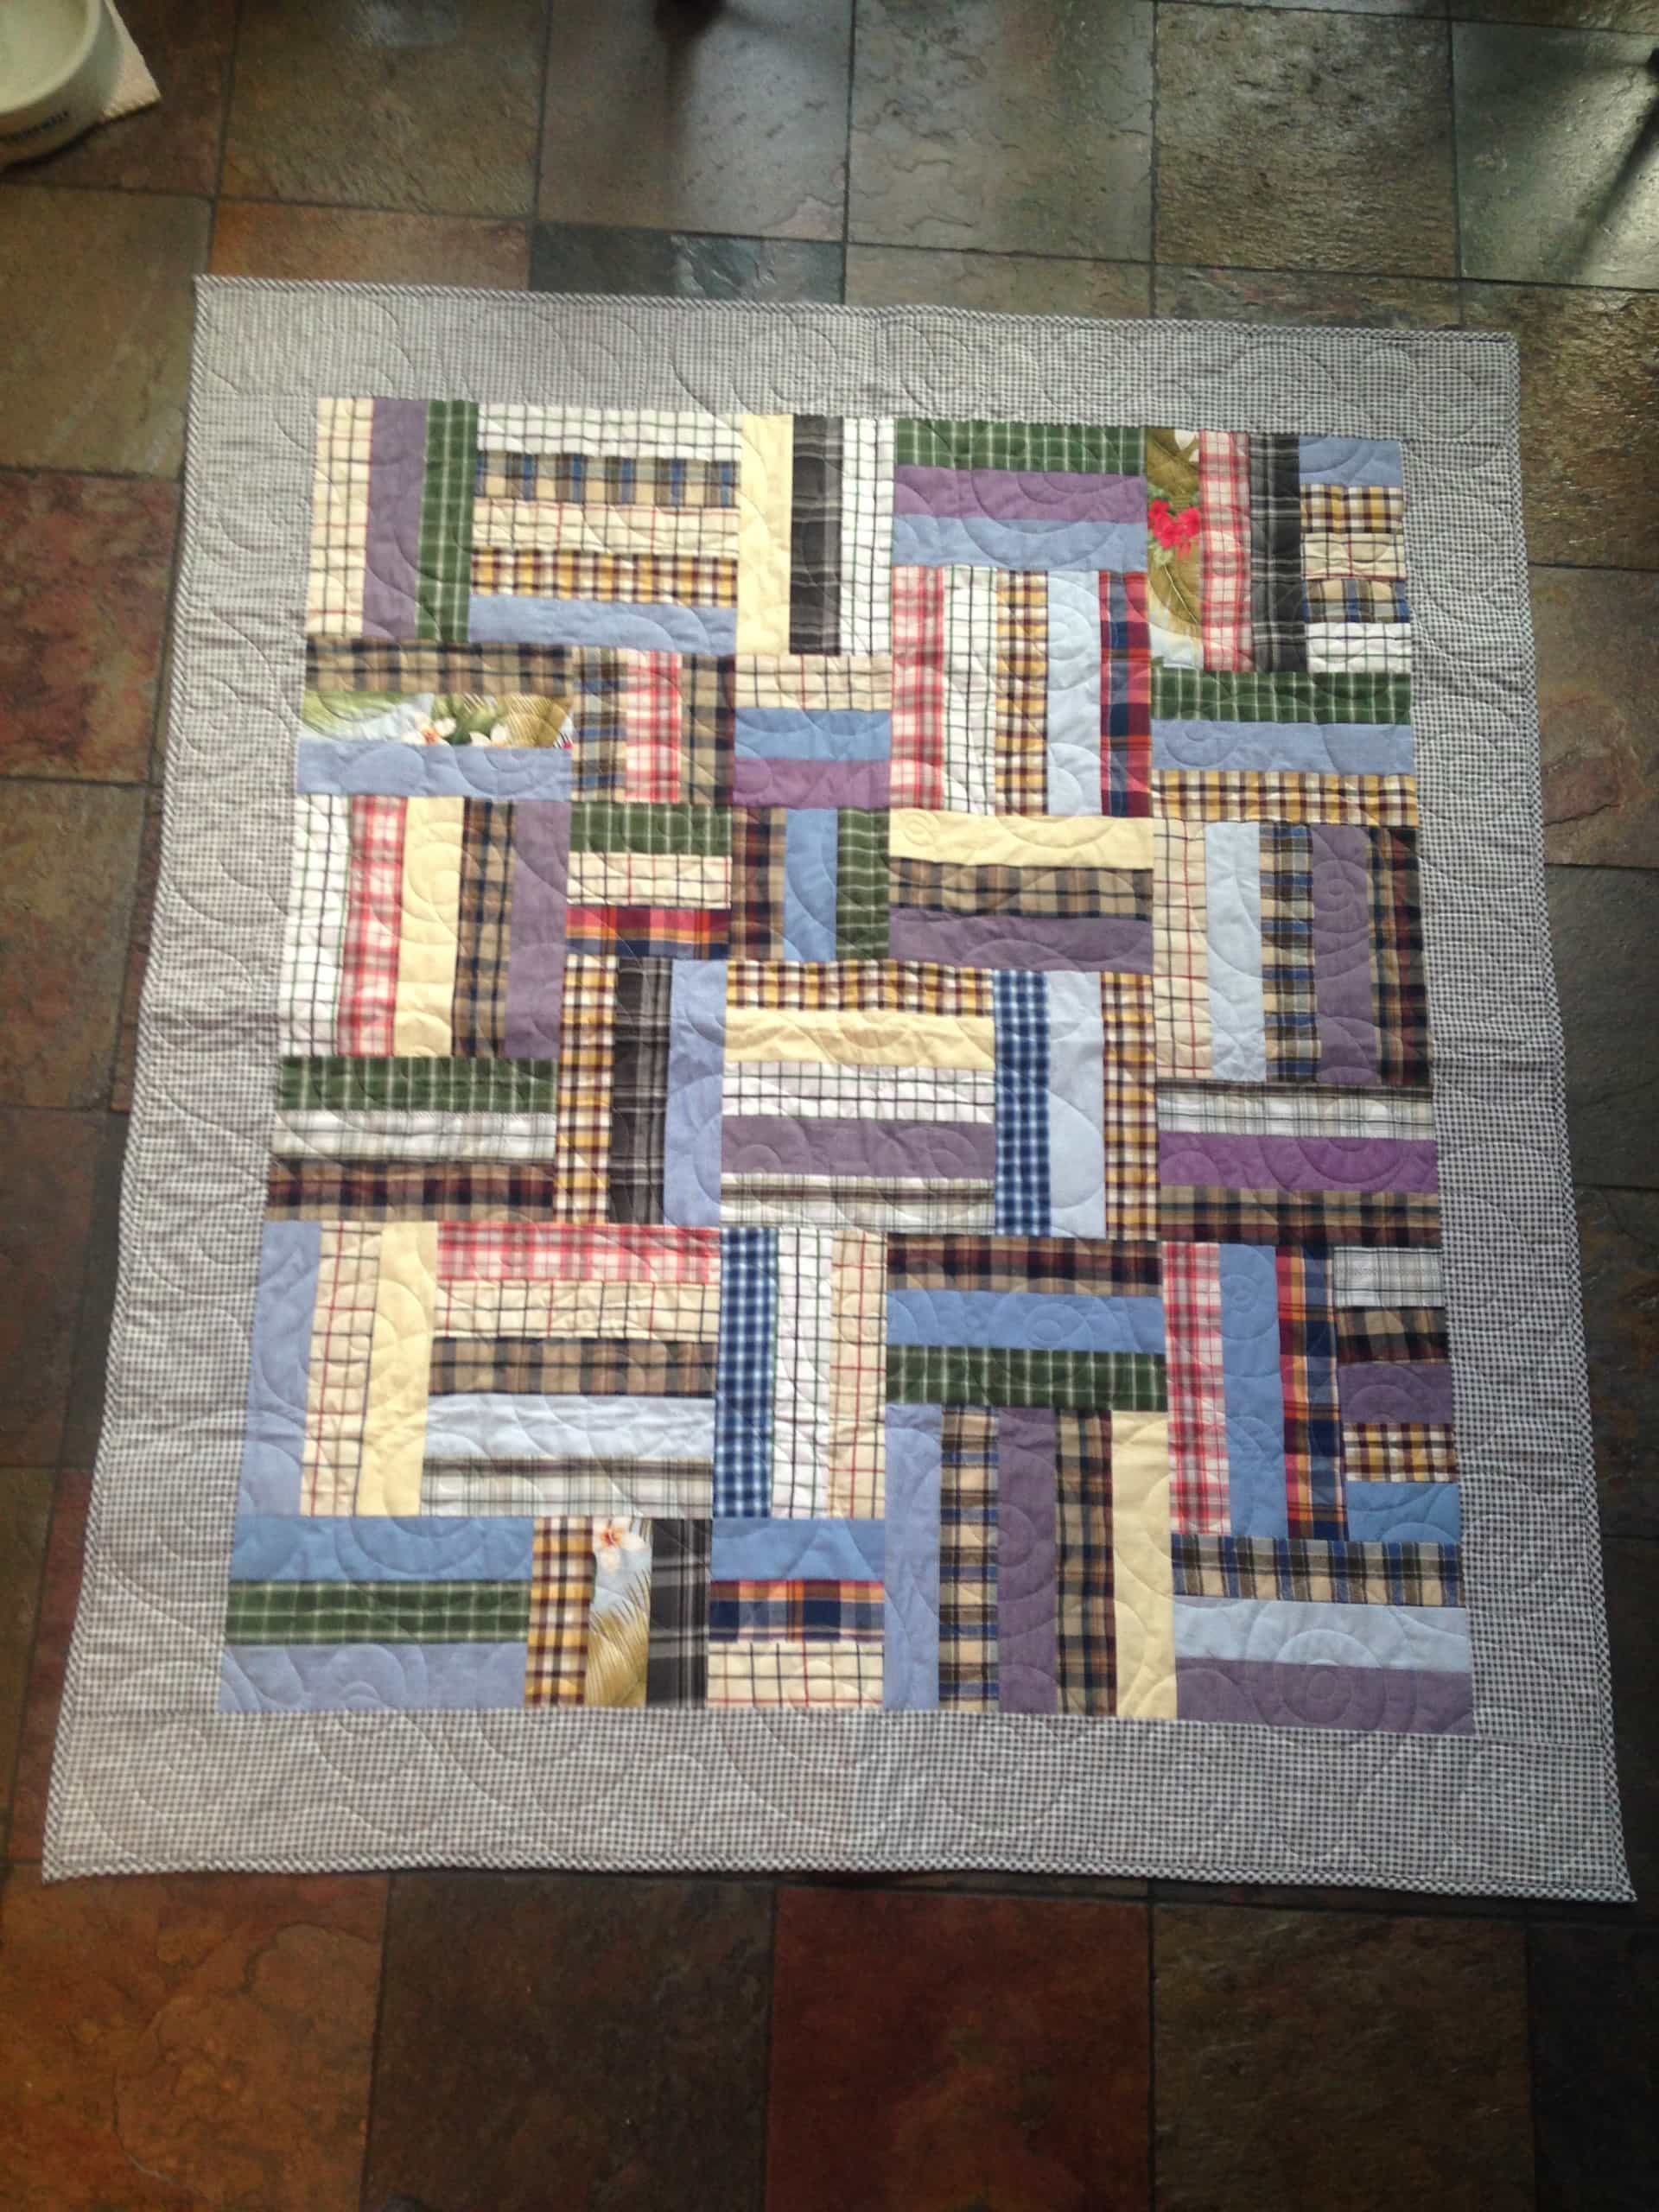 An image of the custom work shirt quilt I made for a customer